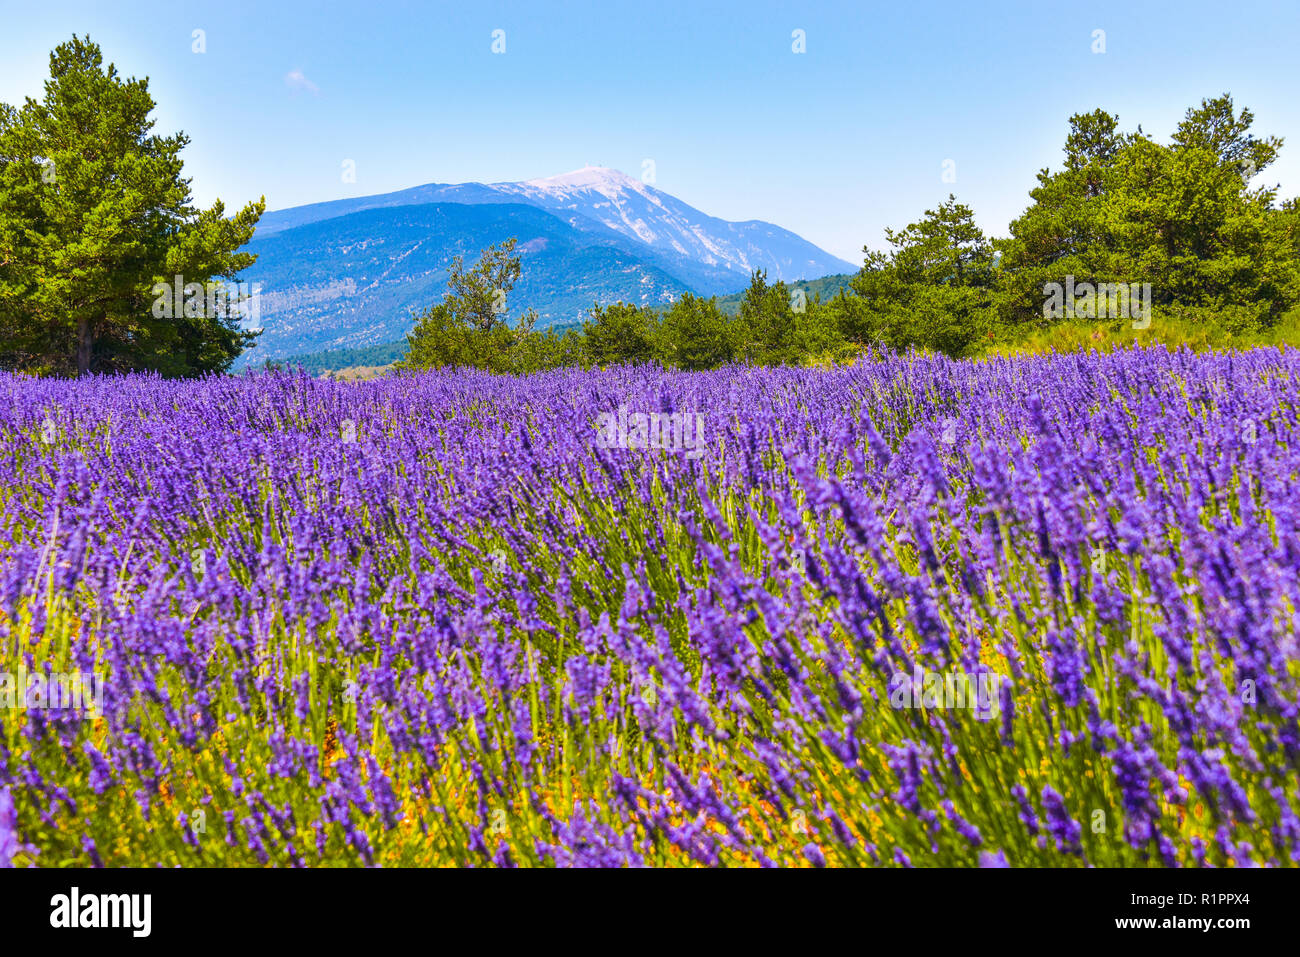 mountain Mont Ventoux with lavender field in foreground, village Ferrassières, Provence, France Stock Photo